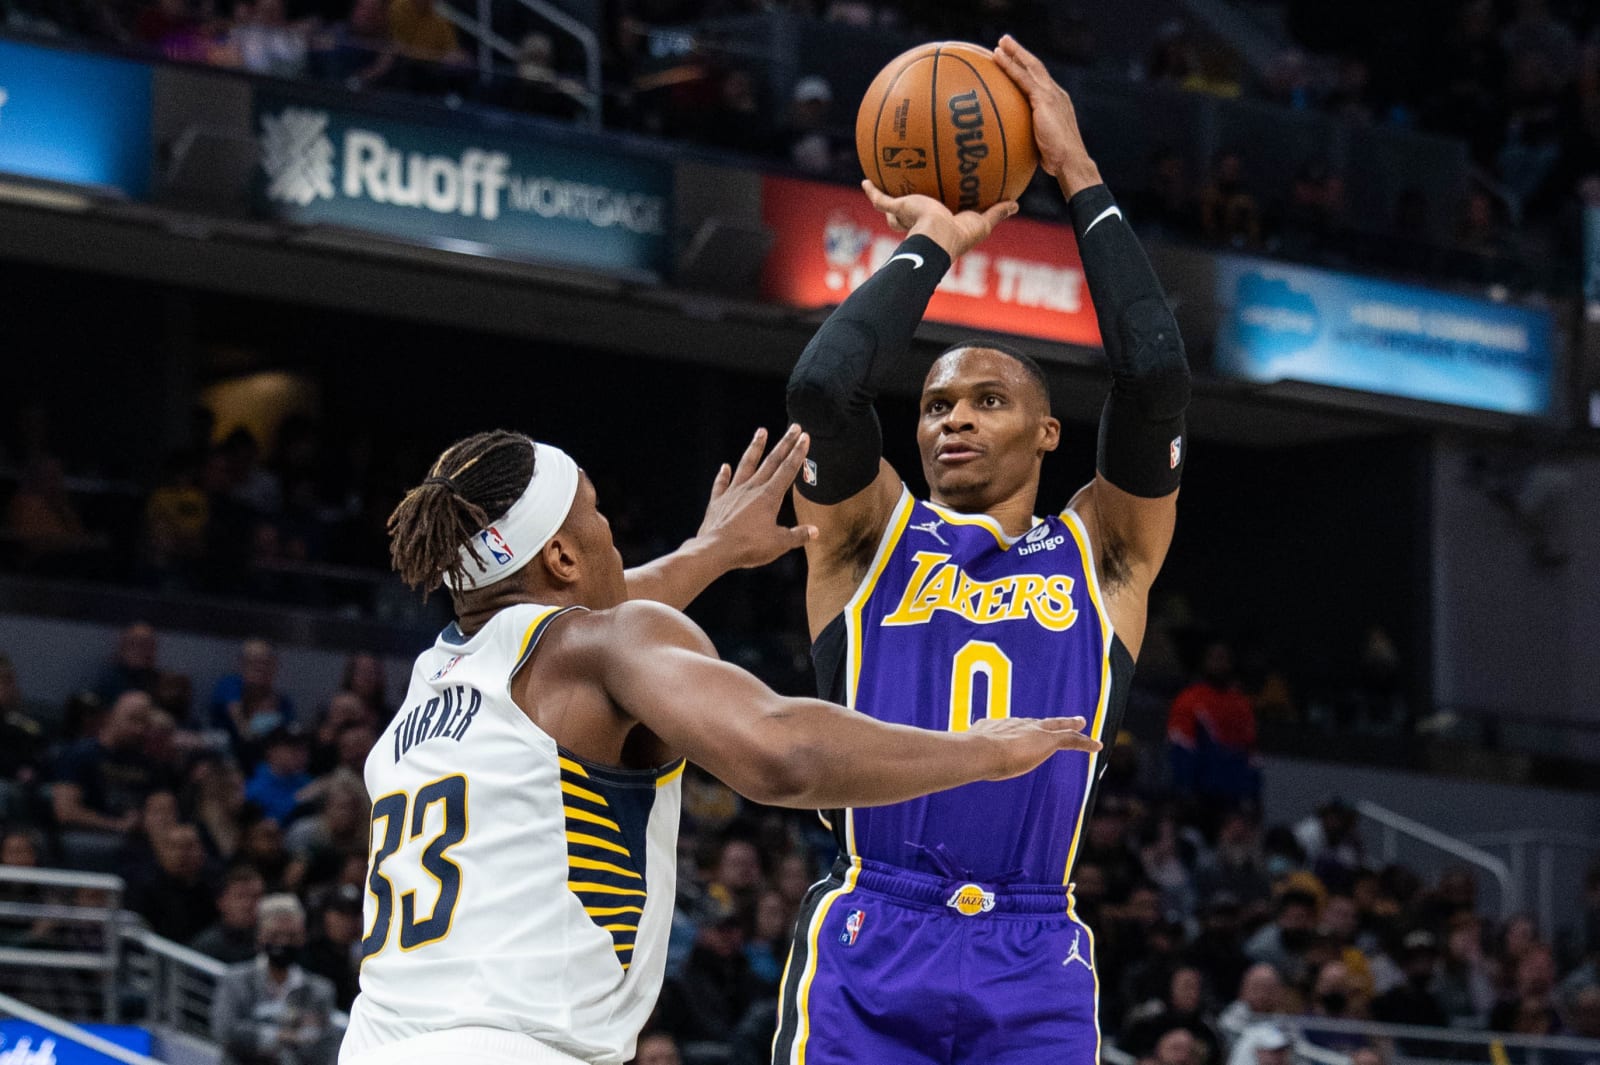 Indiana Pacers: Myles Turner, Los Angeles Lakers: Russell Westbrook